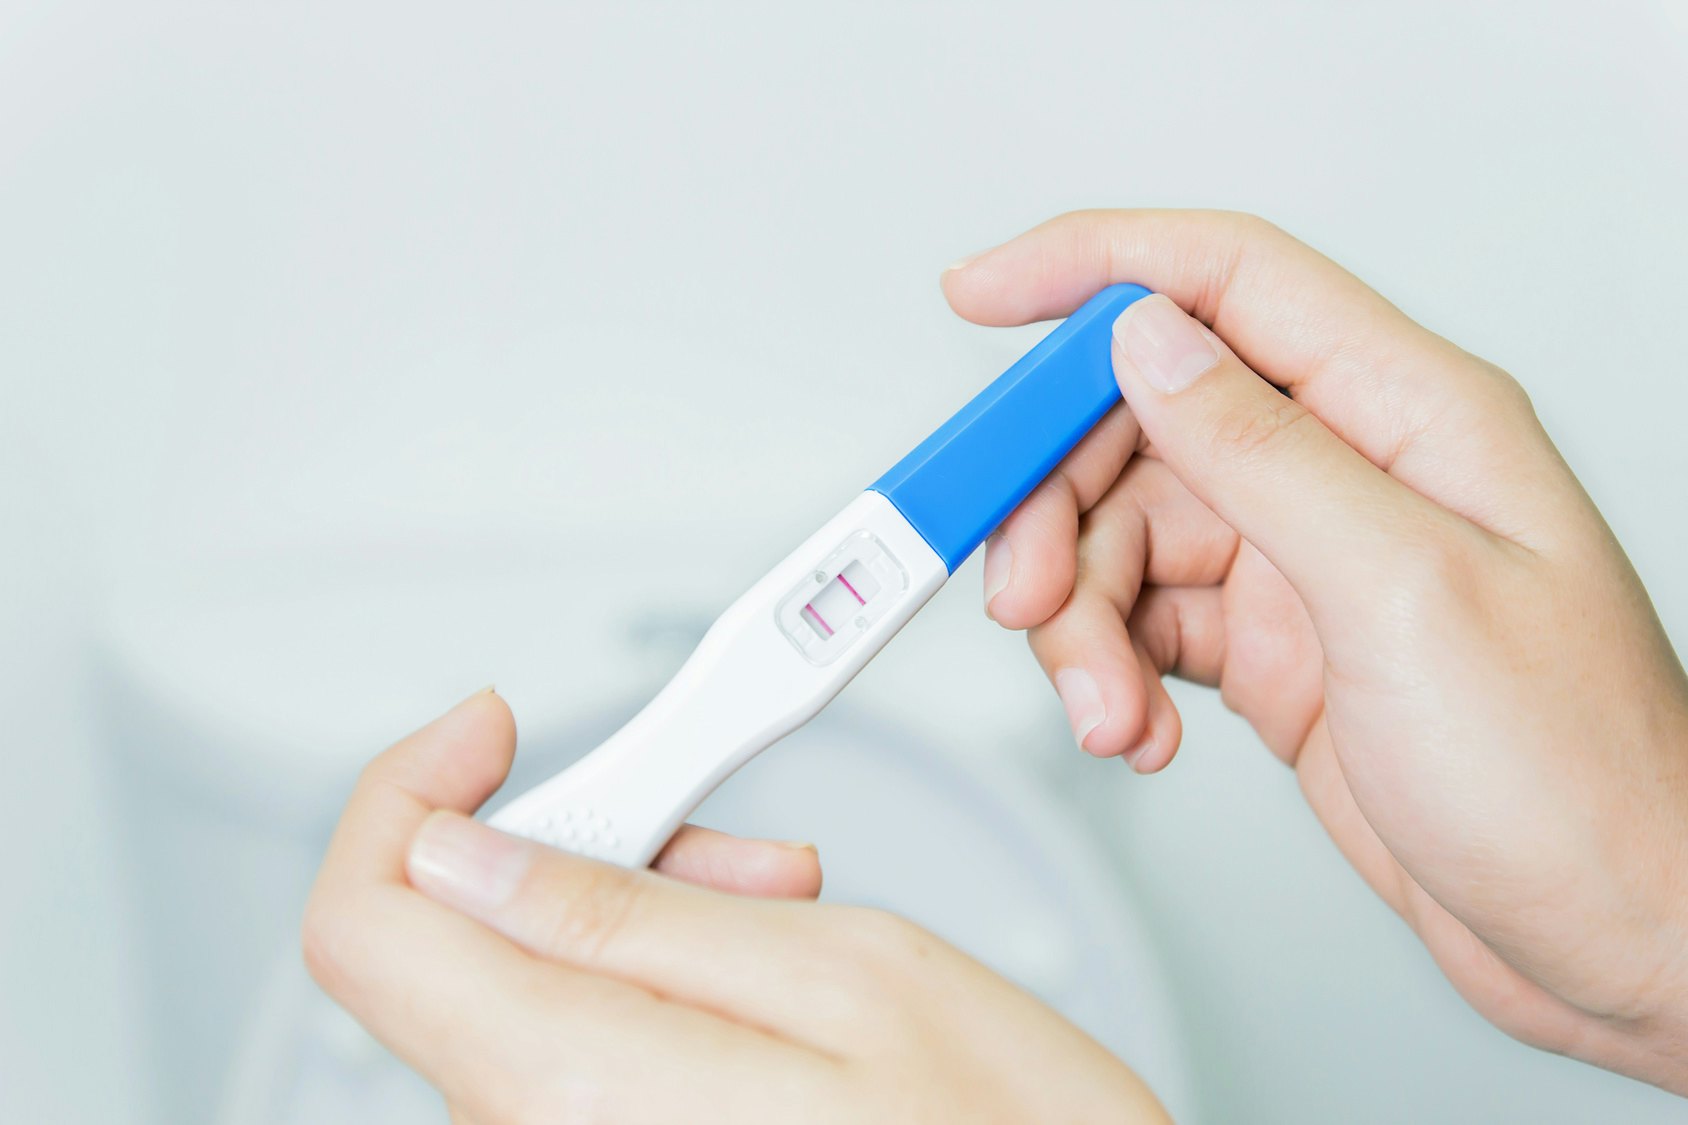 is a pregnancy test accurate 4 weeks after sex